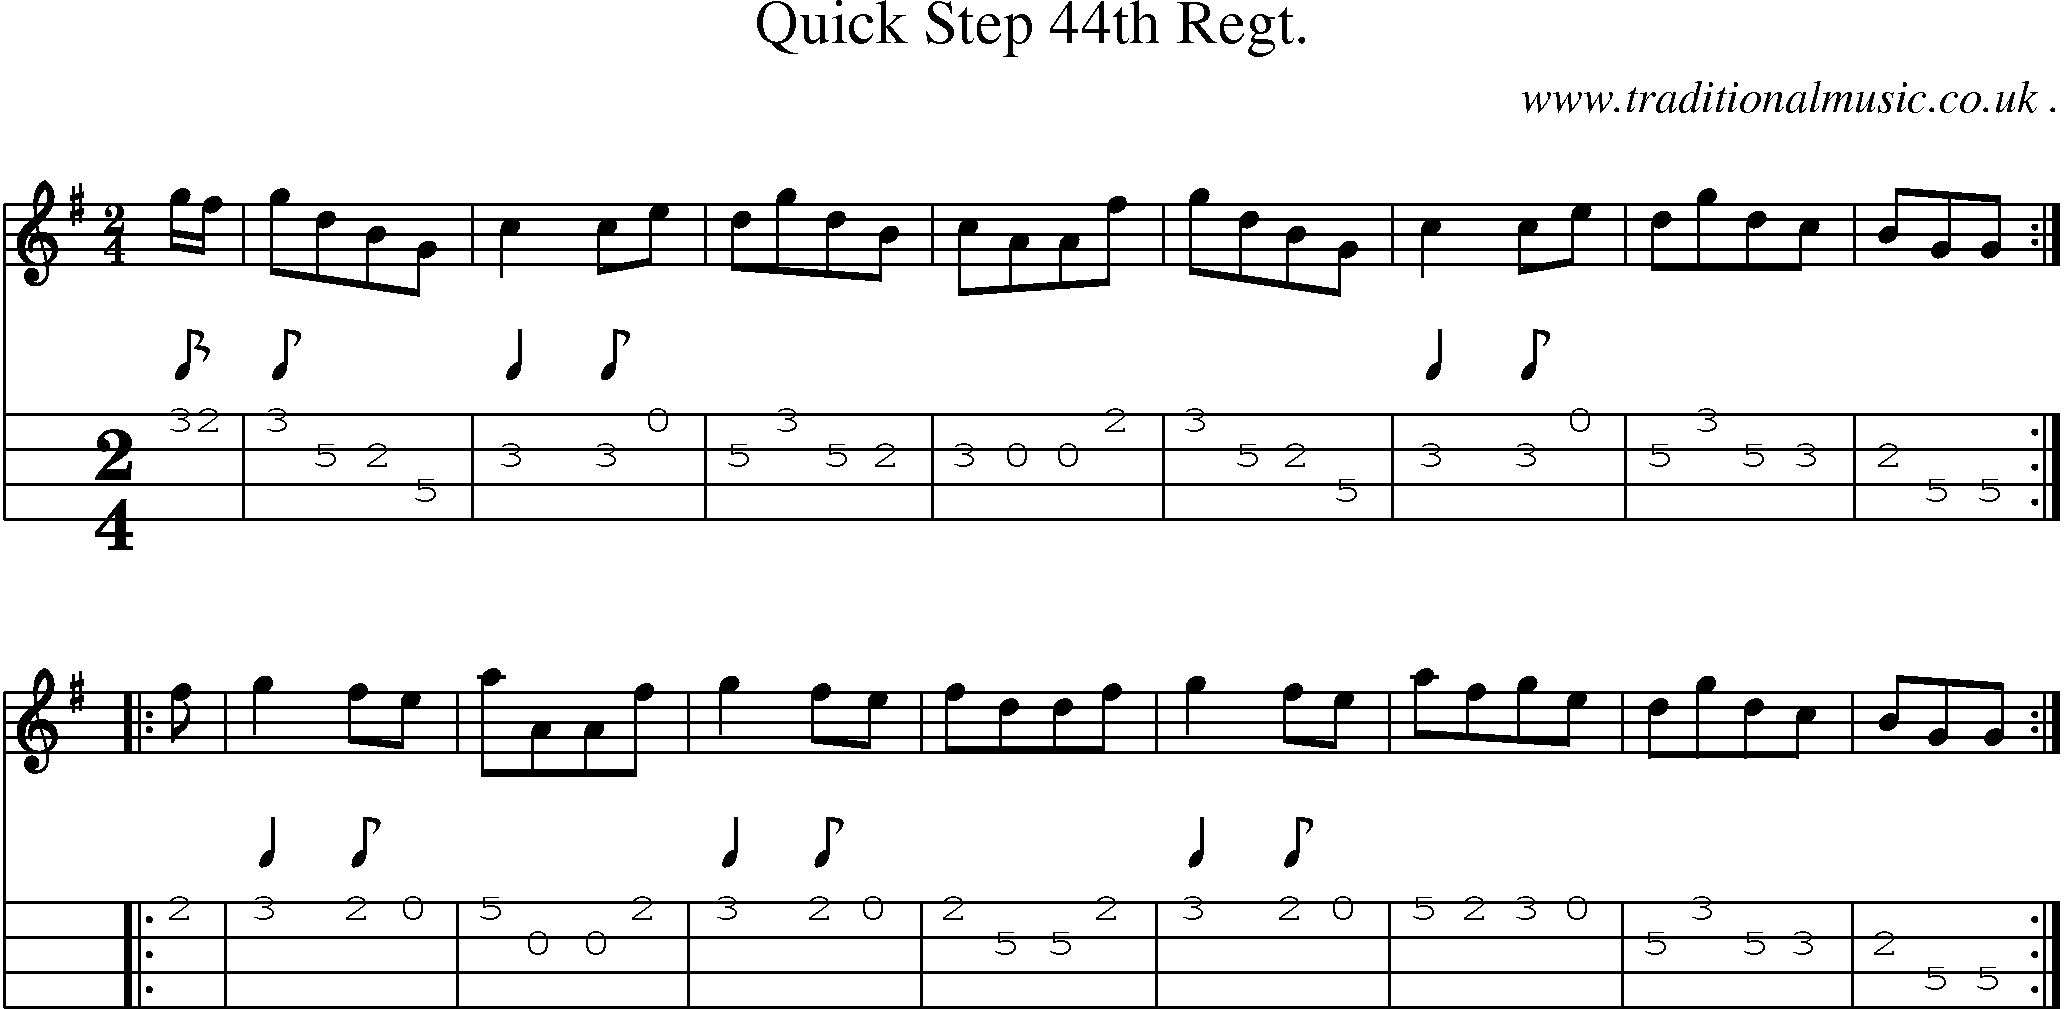 Sheet-music  score, Chords and Mandolin Tabs for Quick Step 44th Regt